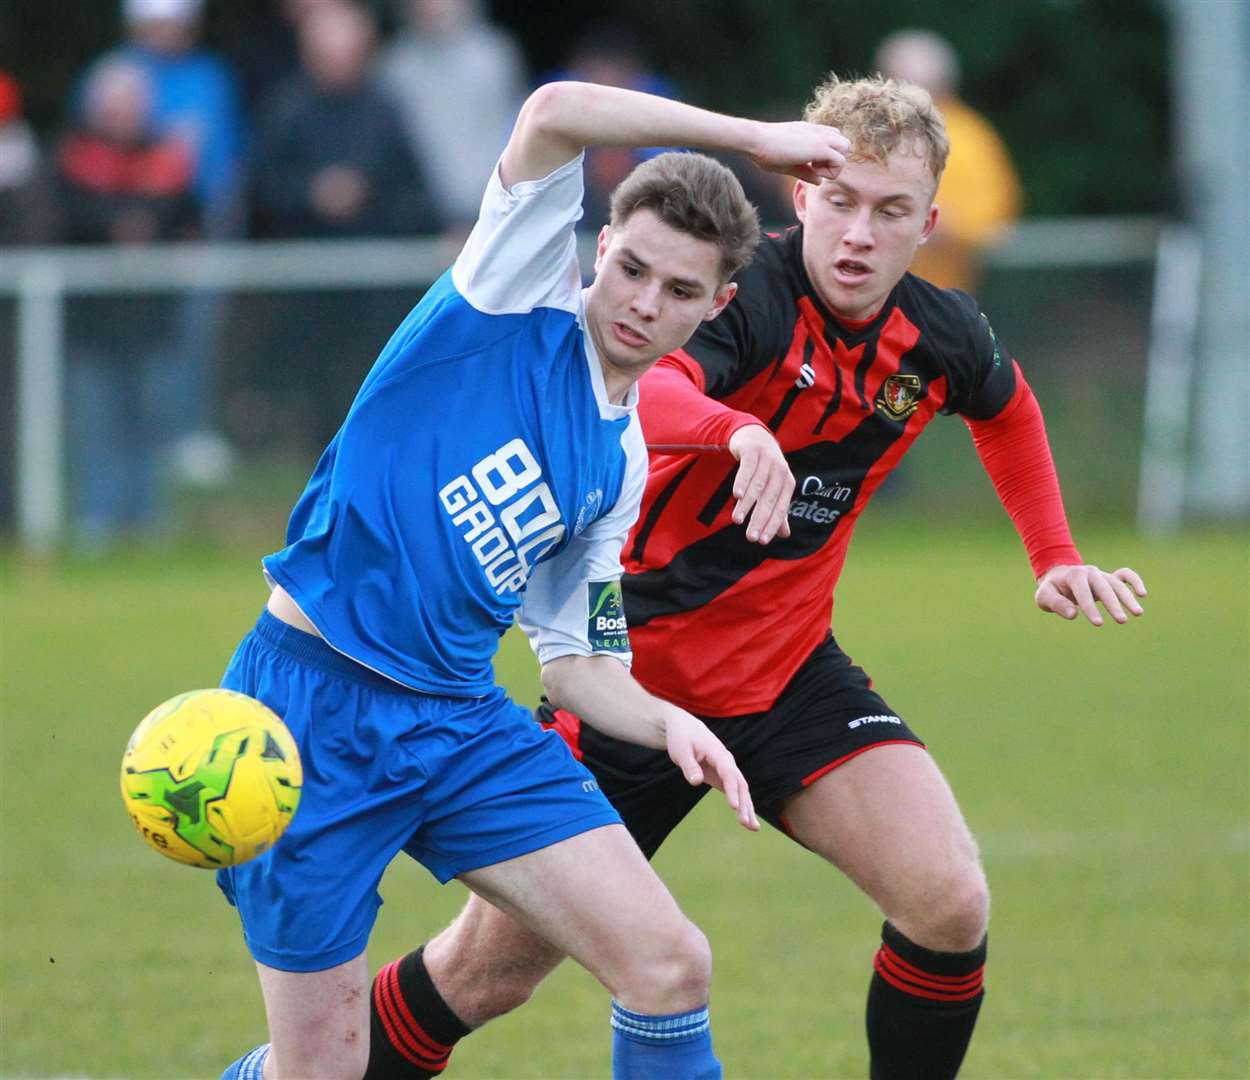 Prolific Jake Embery in action for Herne Bay against former club Sittingbourne Picture: John Westhrop